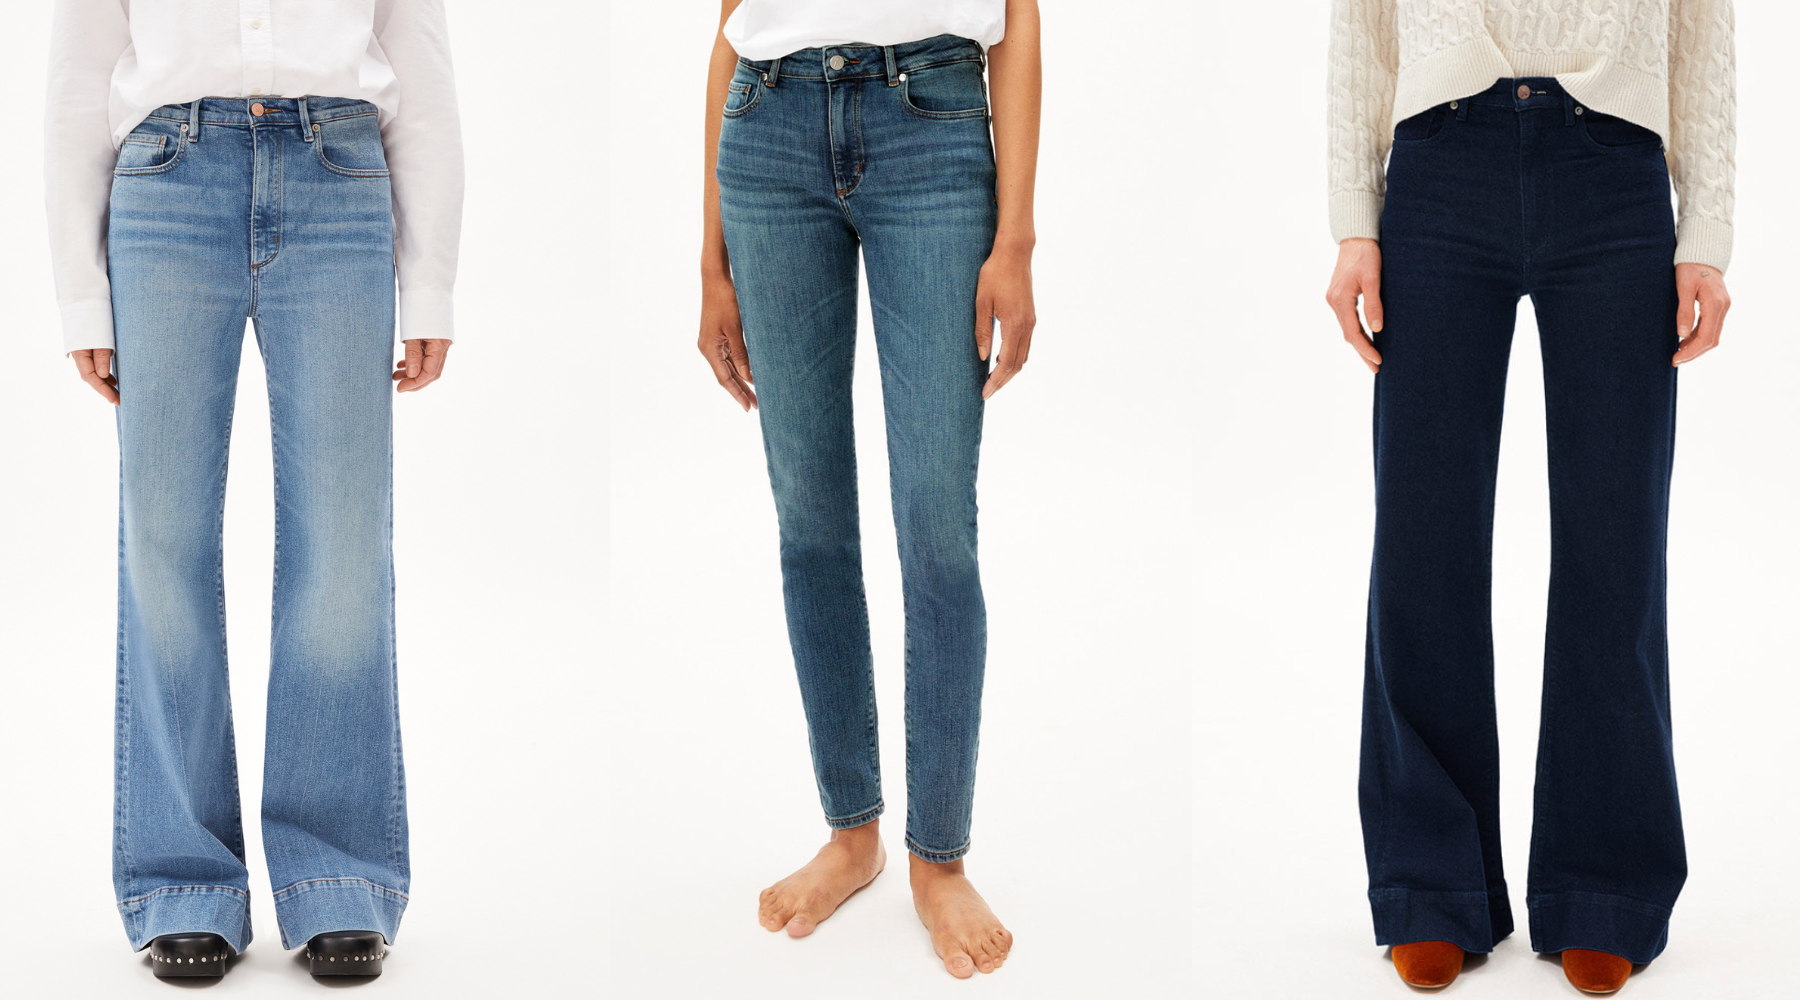 The search for the perfect jeans for your figure